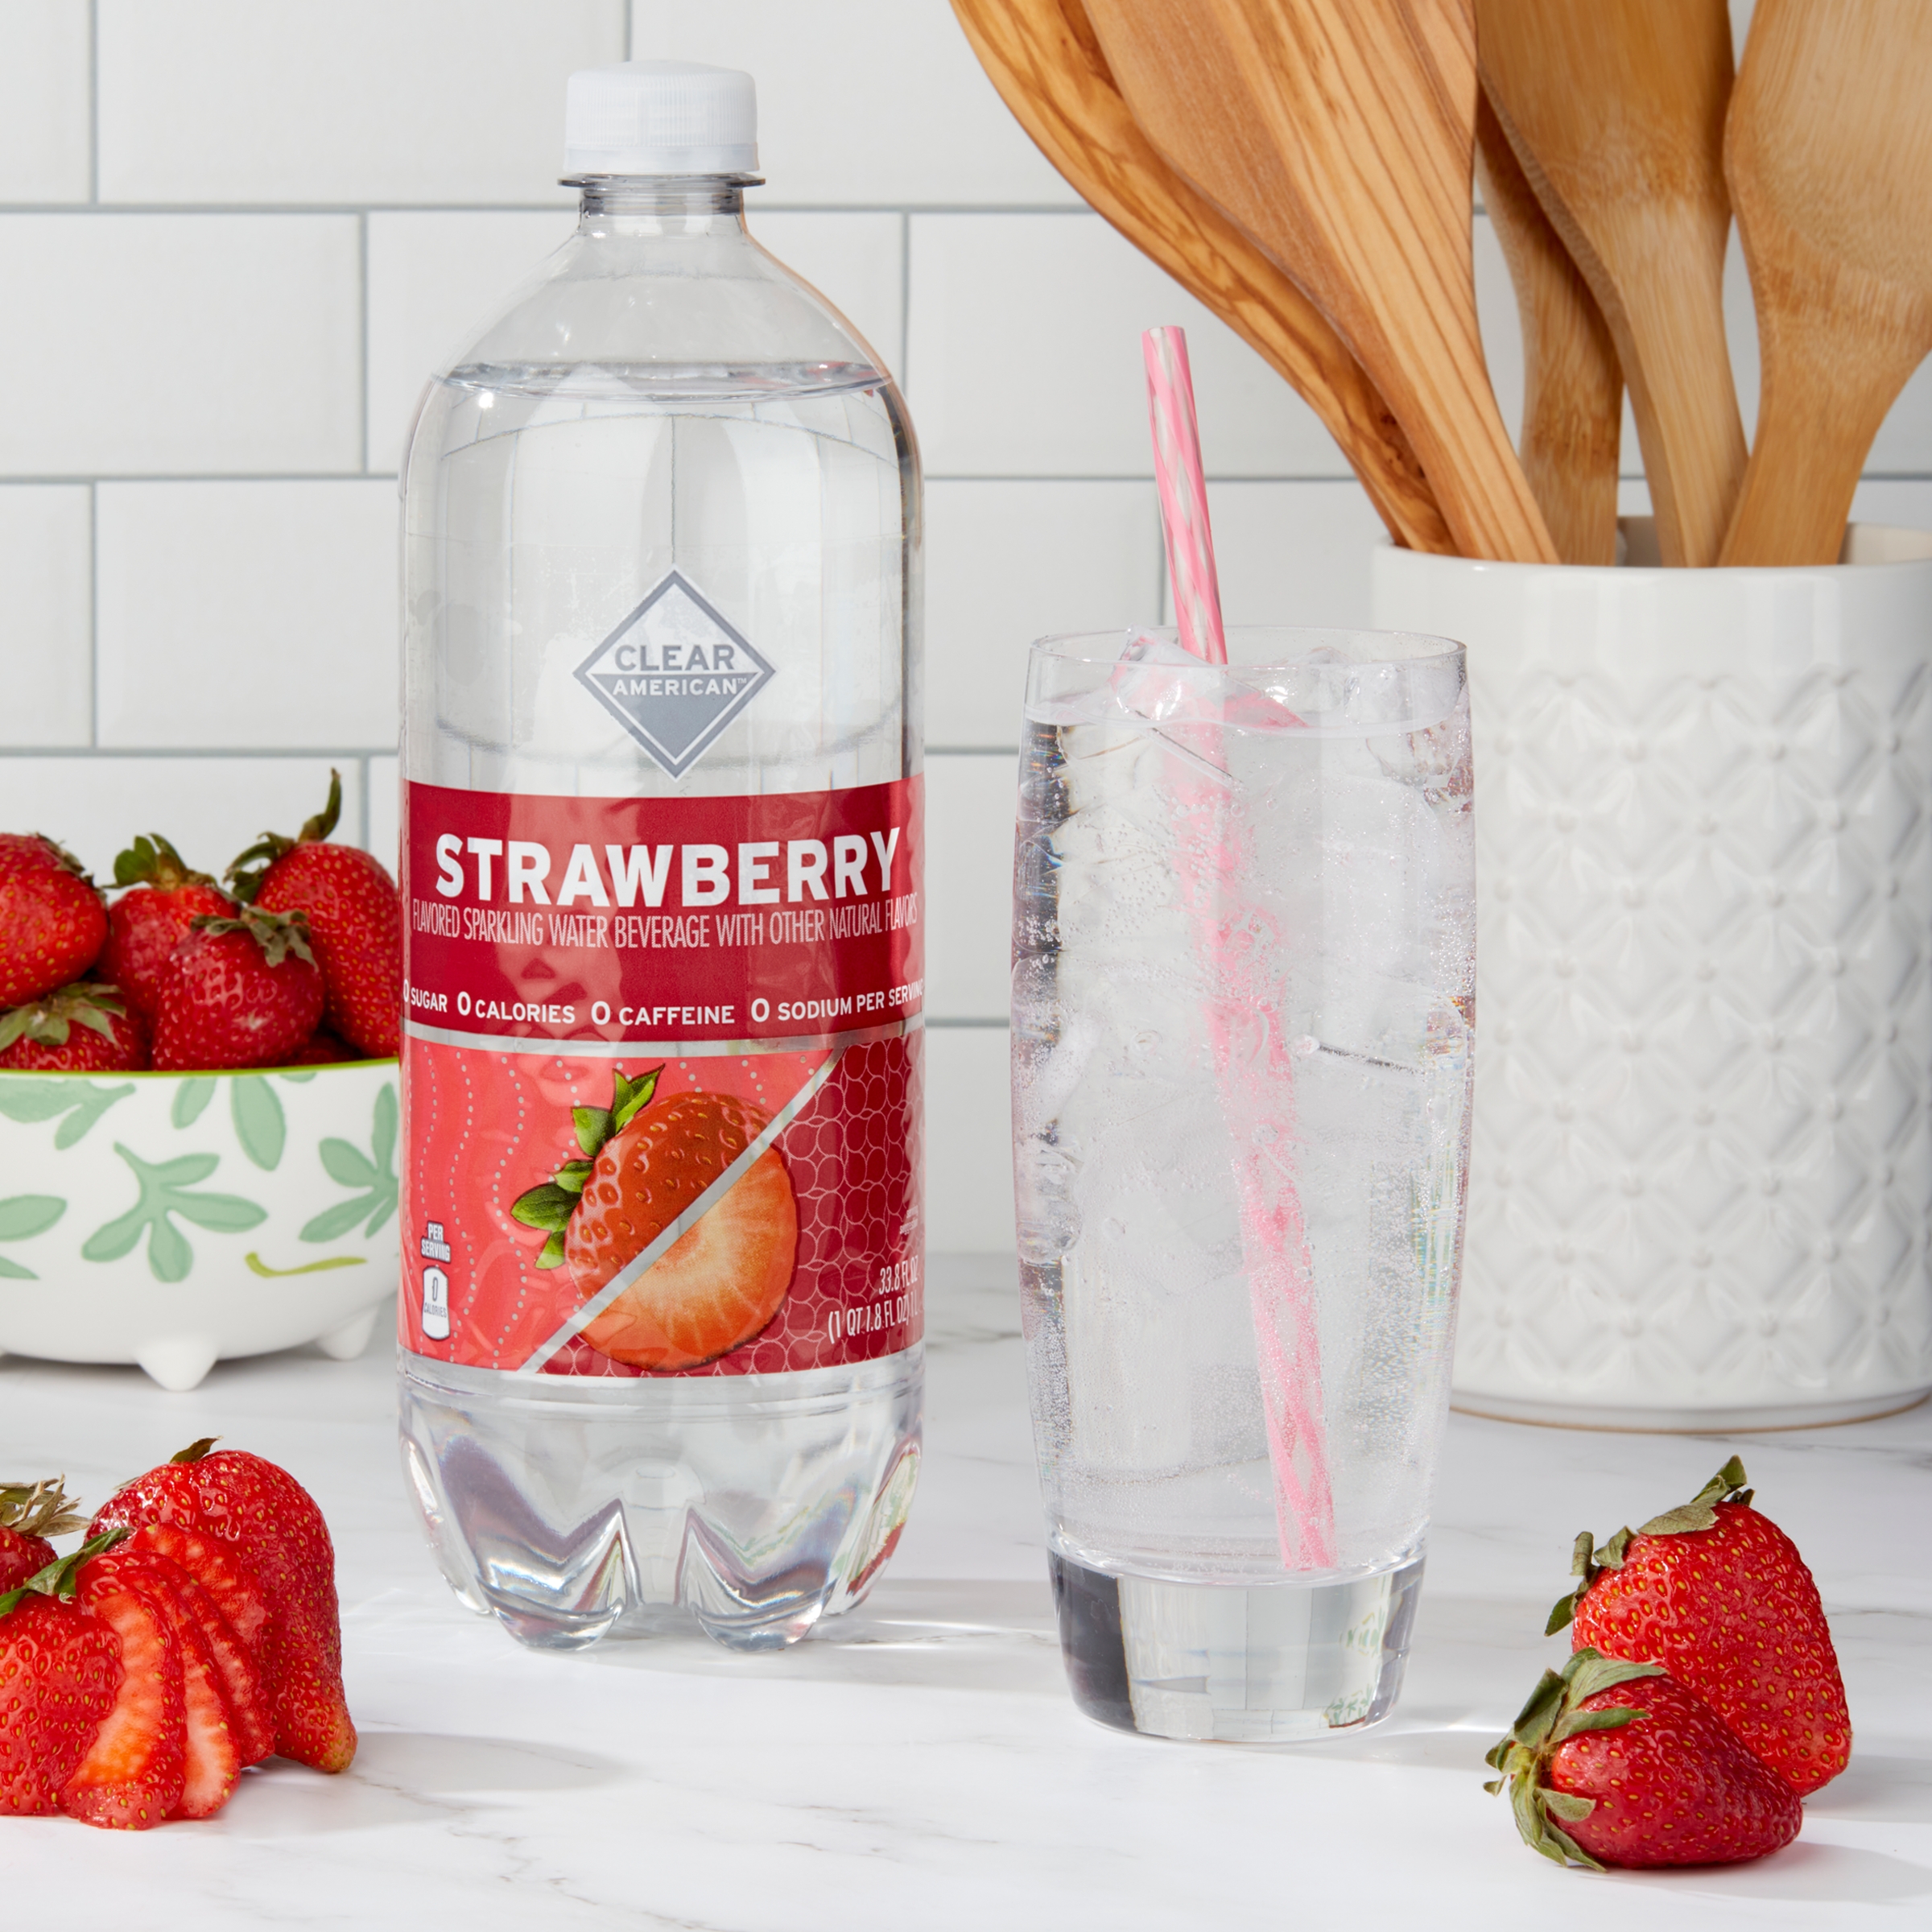 Clear American Sparkling Water, Strawberry, 33.8 fl oz - image 2 of 7